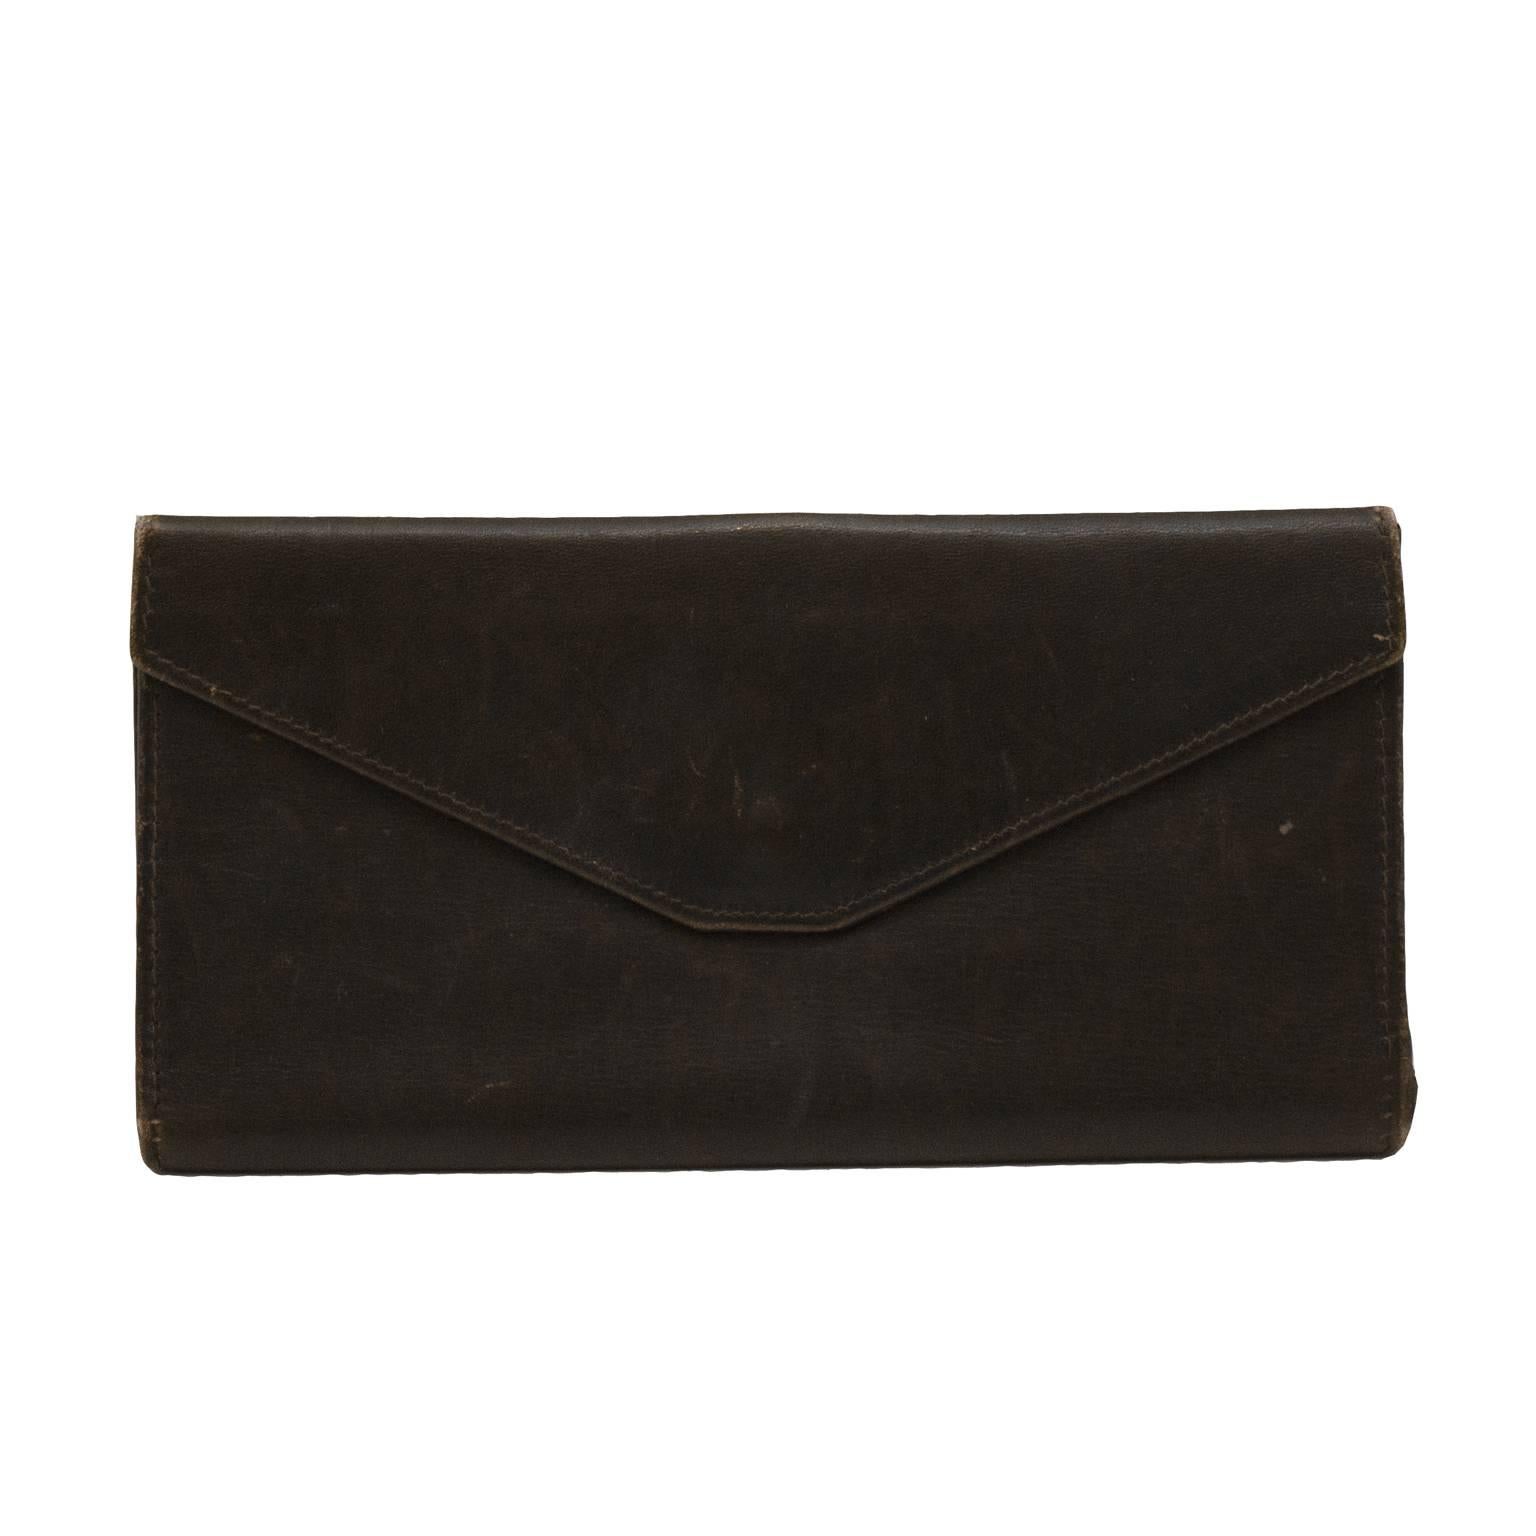 This classic unisex Gucci long bi-fold wallet from the 1970's is brown leather with a fabulous gold tone metal belt buckle closure. Features envelope flap exterior pocket, and green leather interior lining. Four large interior pockets make for great